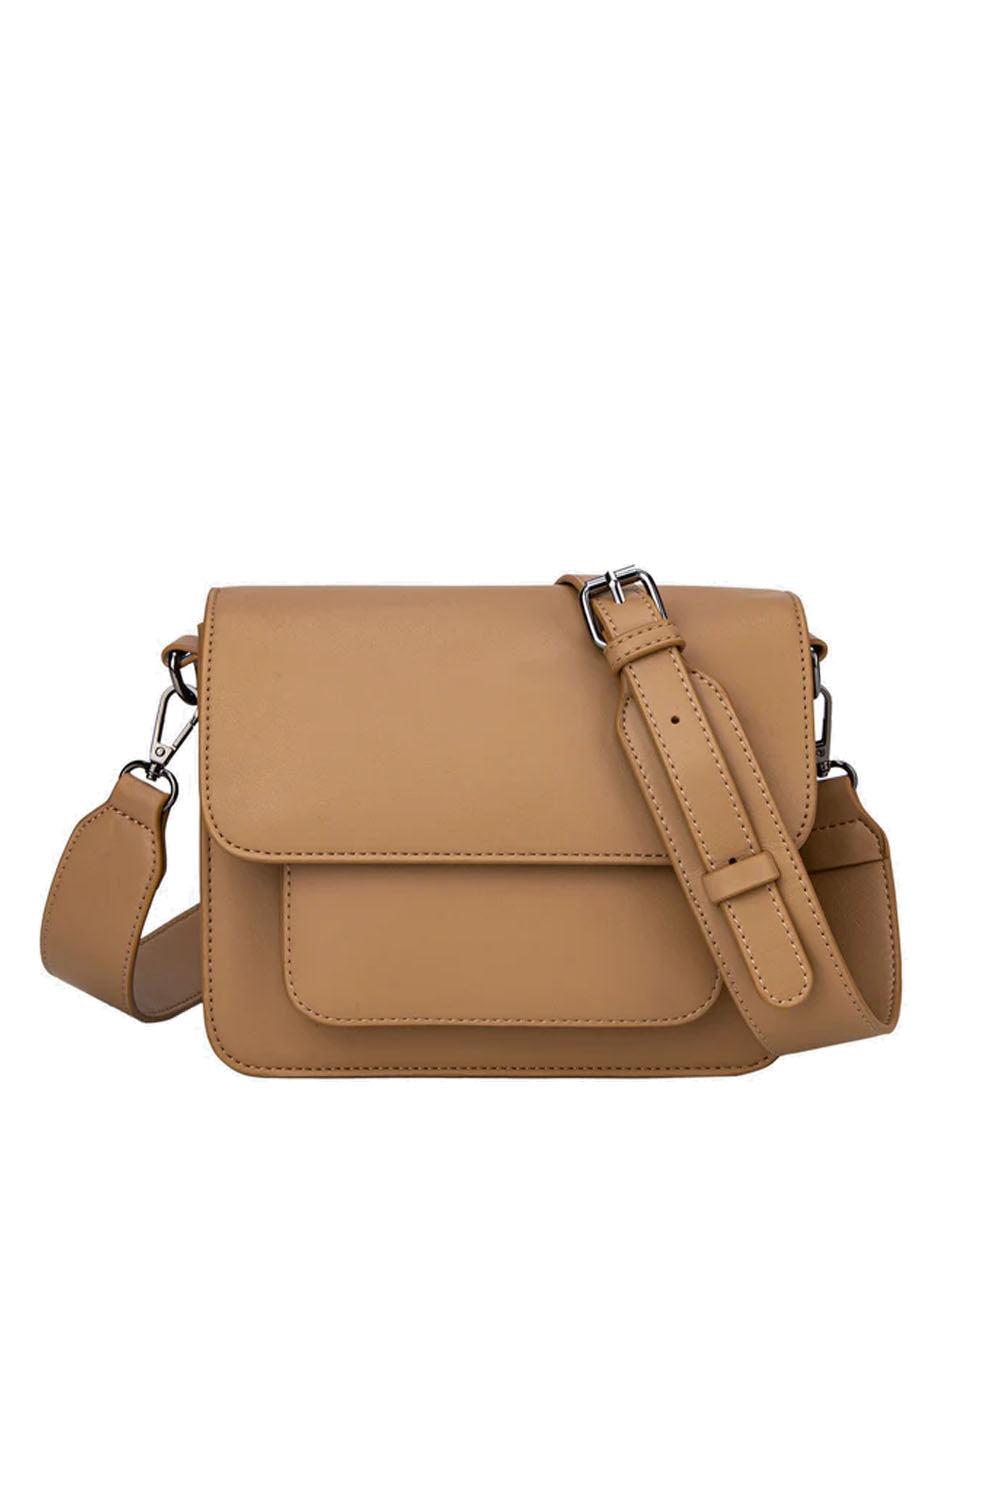 Cayman Pocket Soft Structure Tan Brown